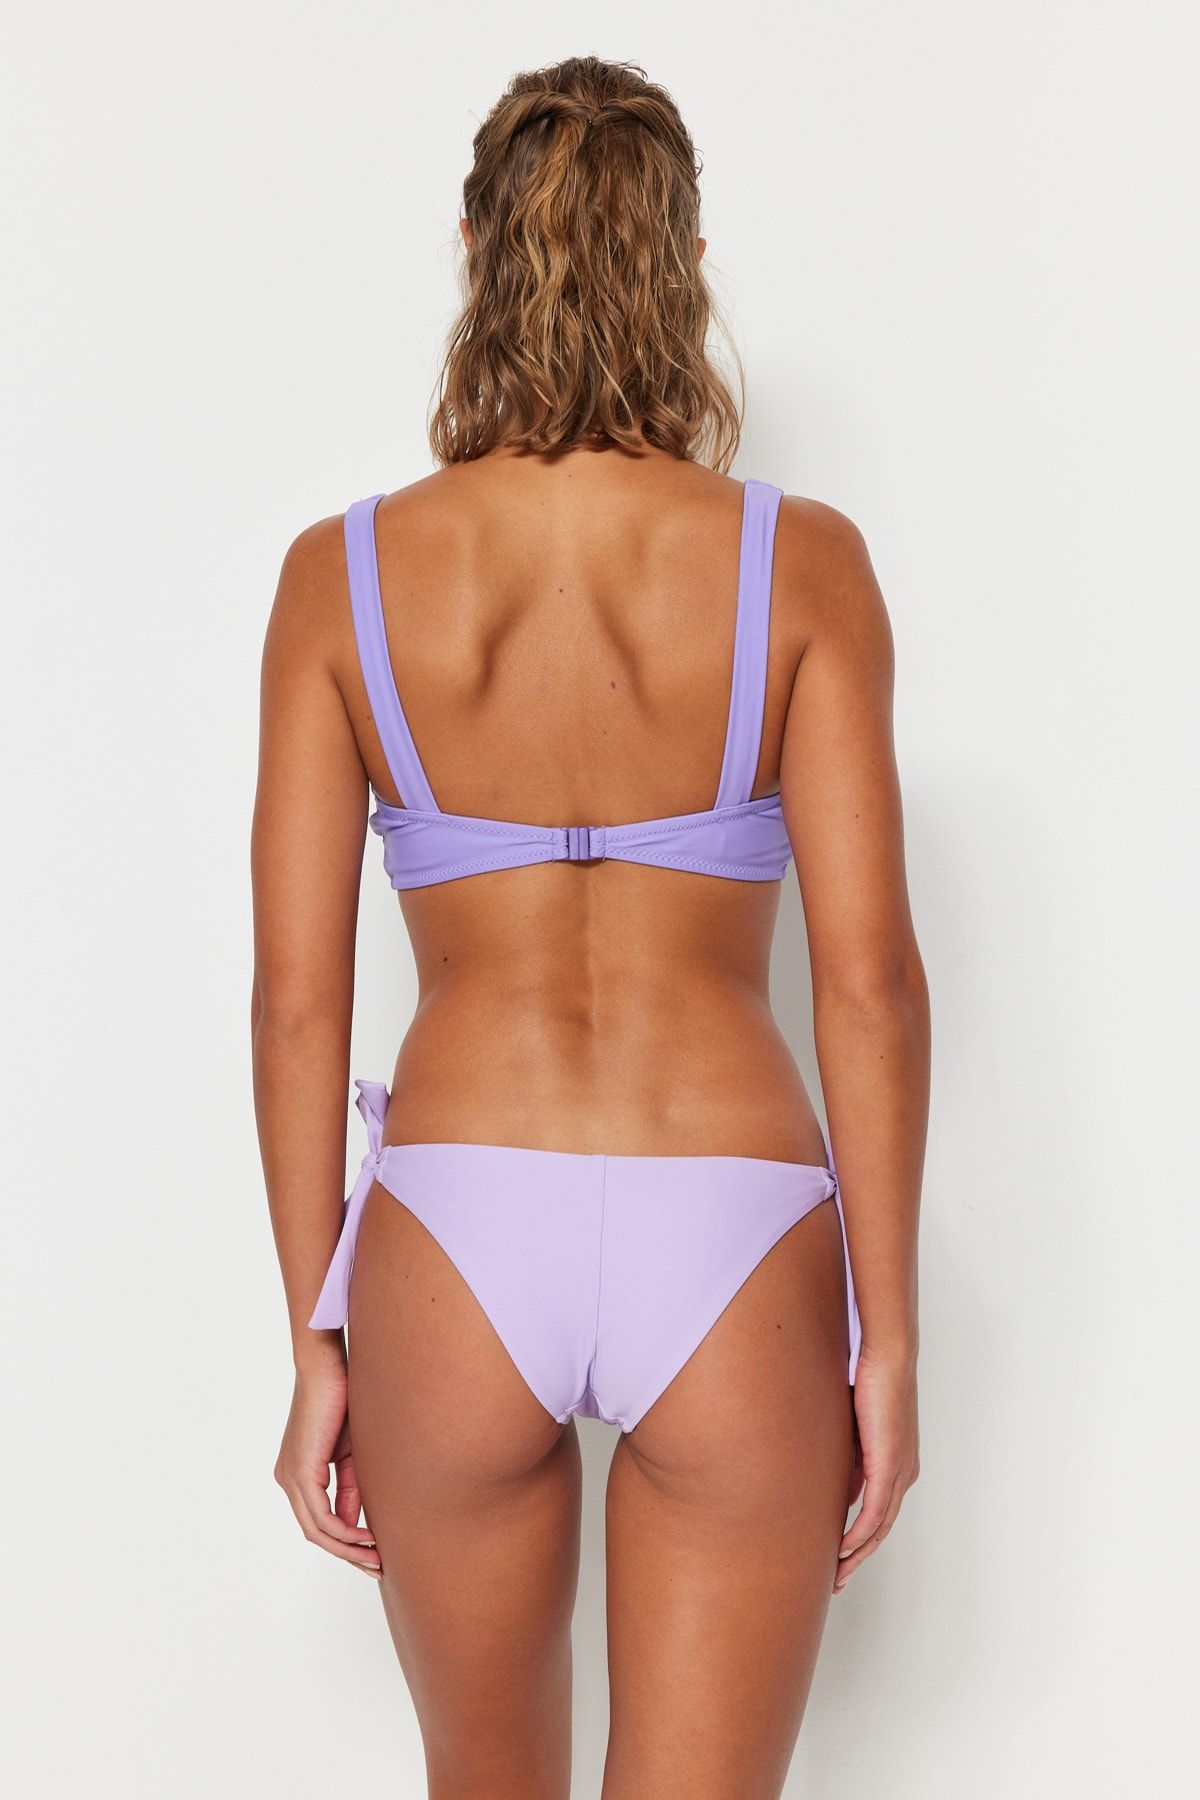 French Connection bikini bottom in blue